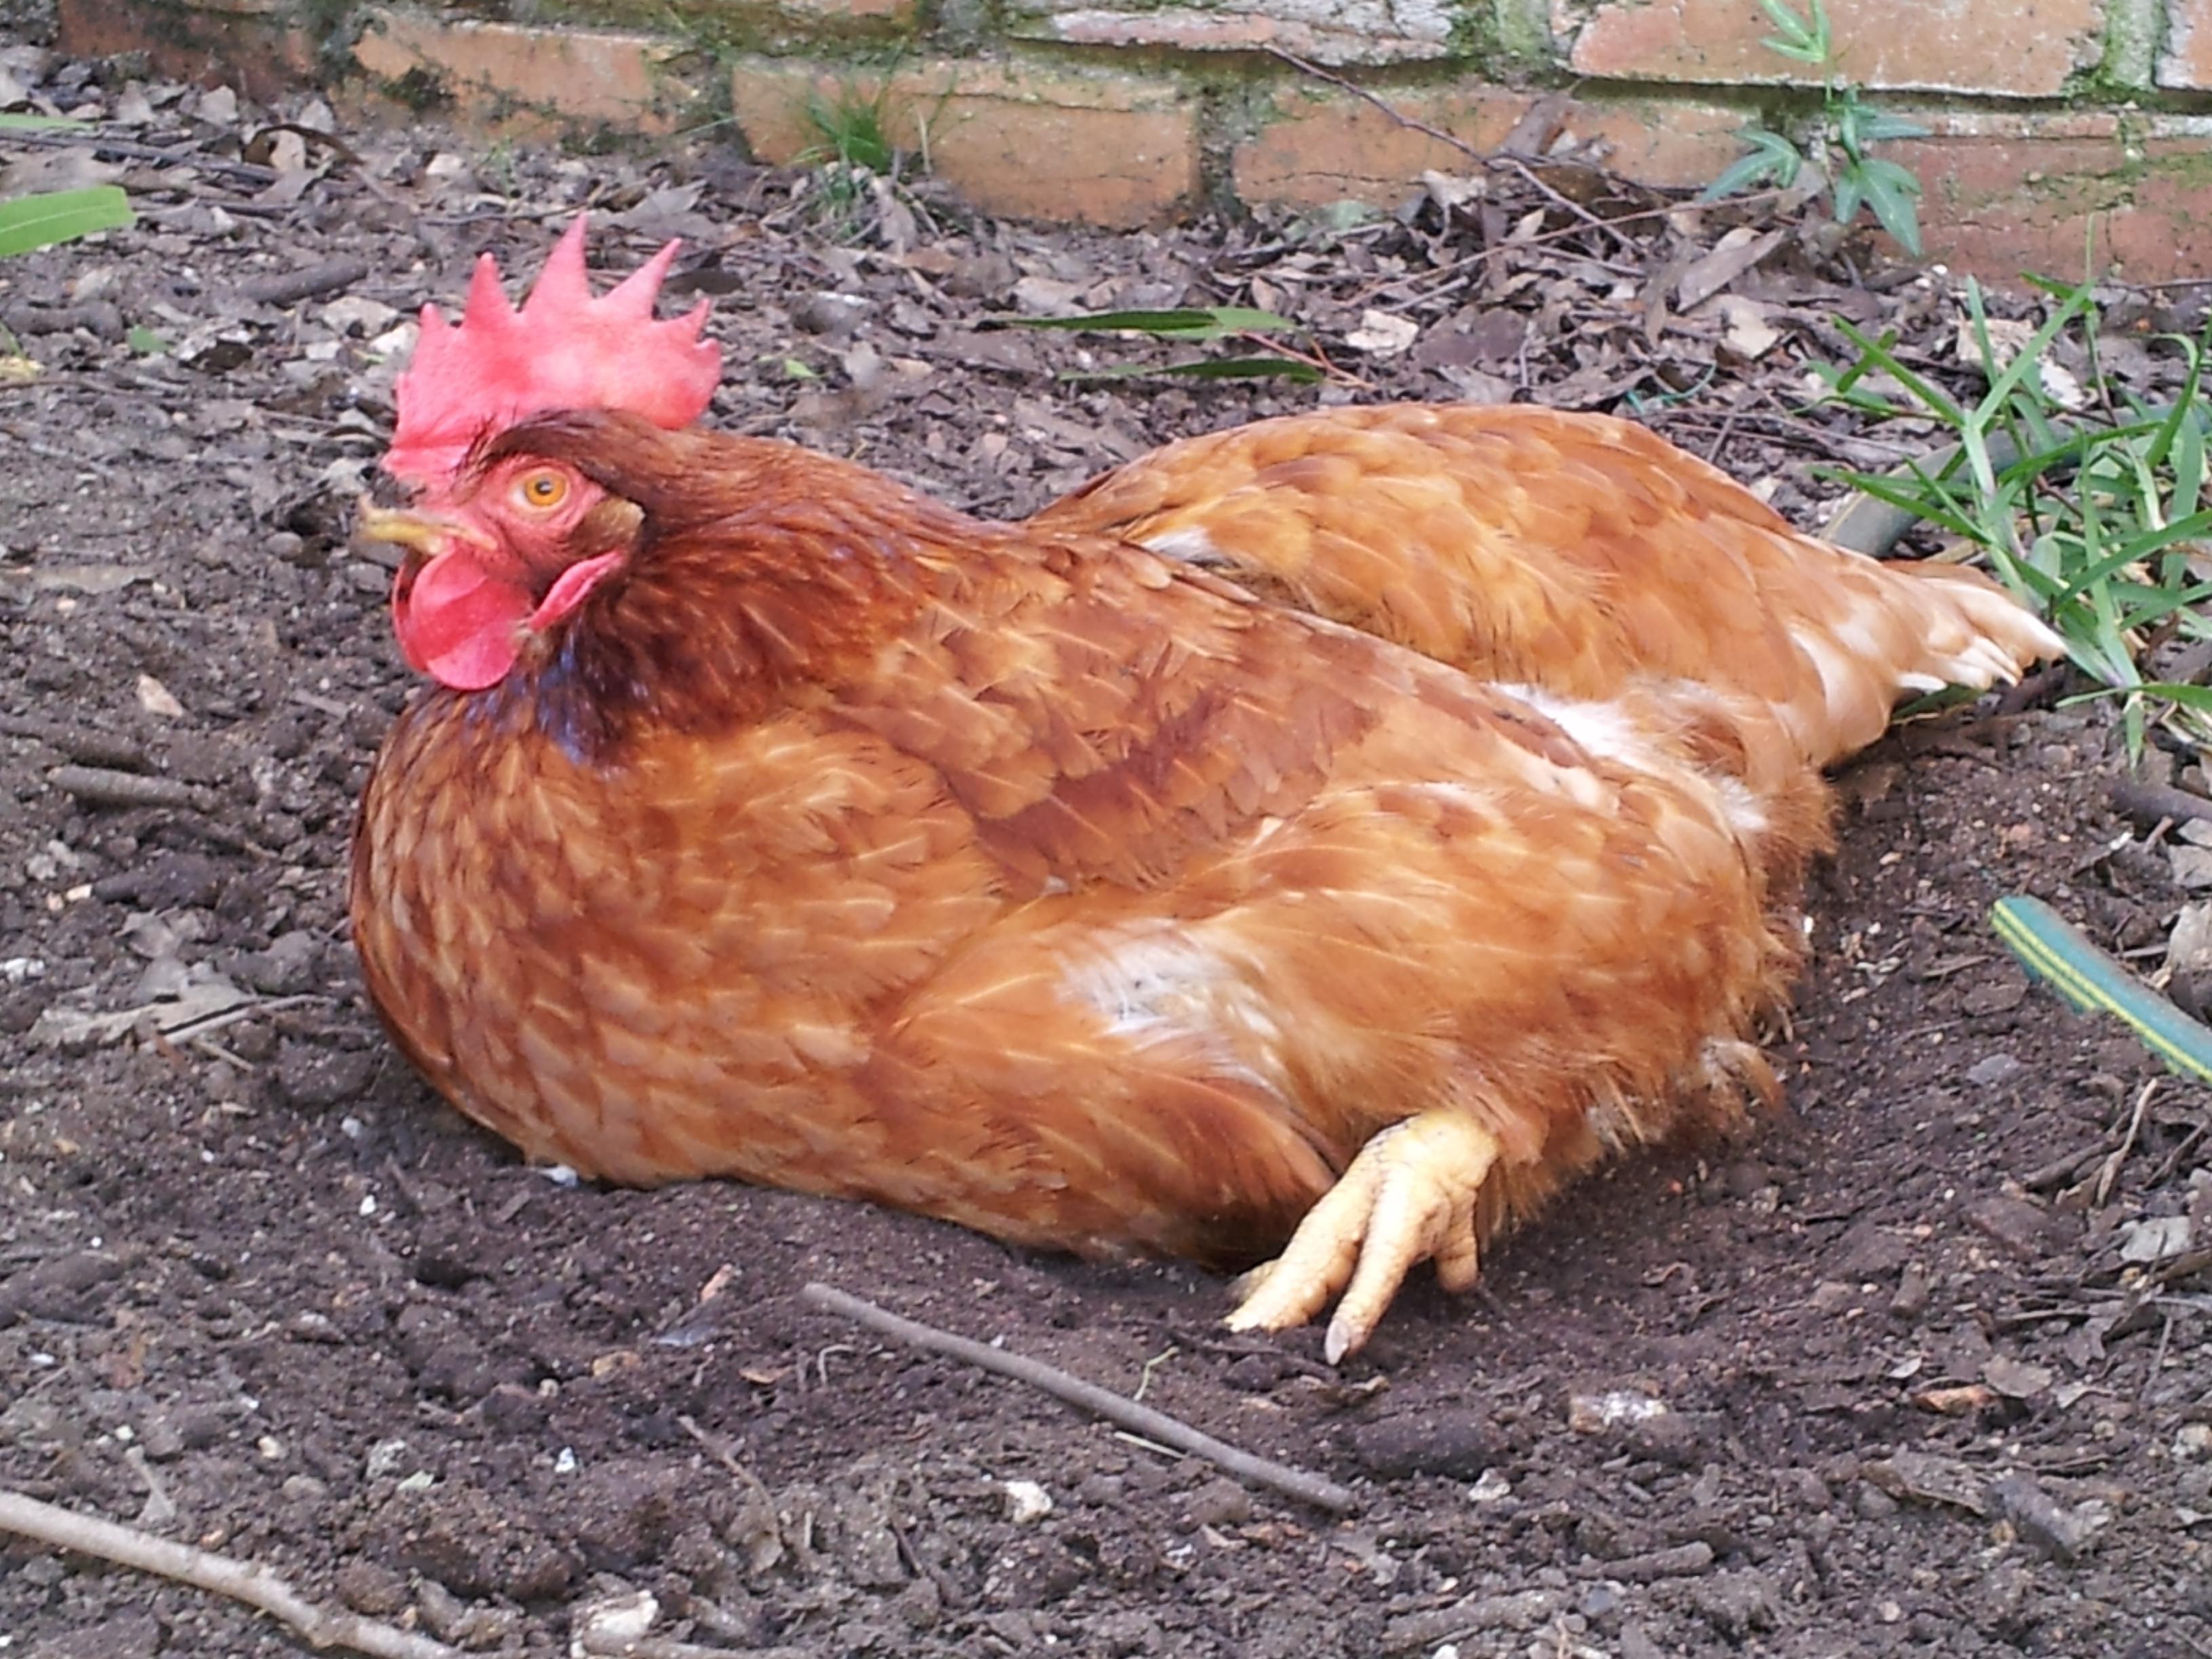 Why Do Chickens Like to Bathe in Dirt?